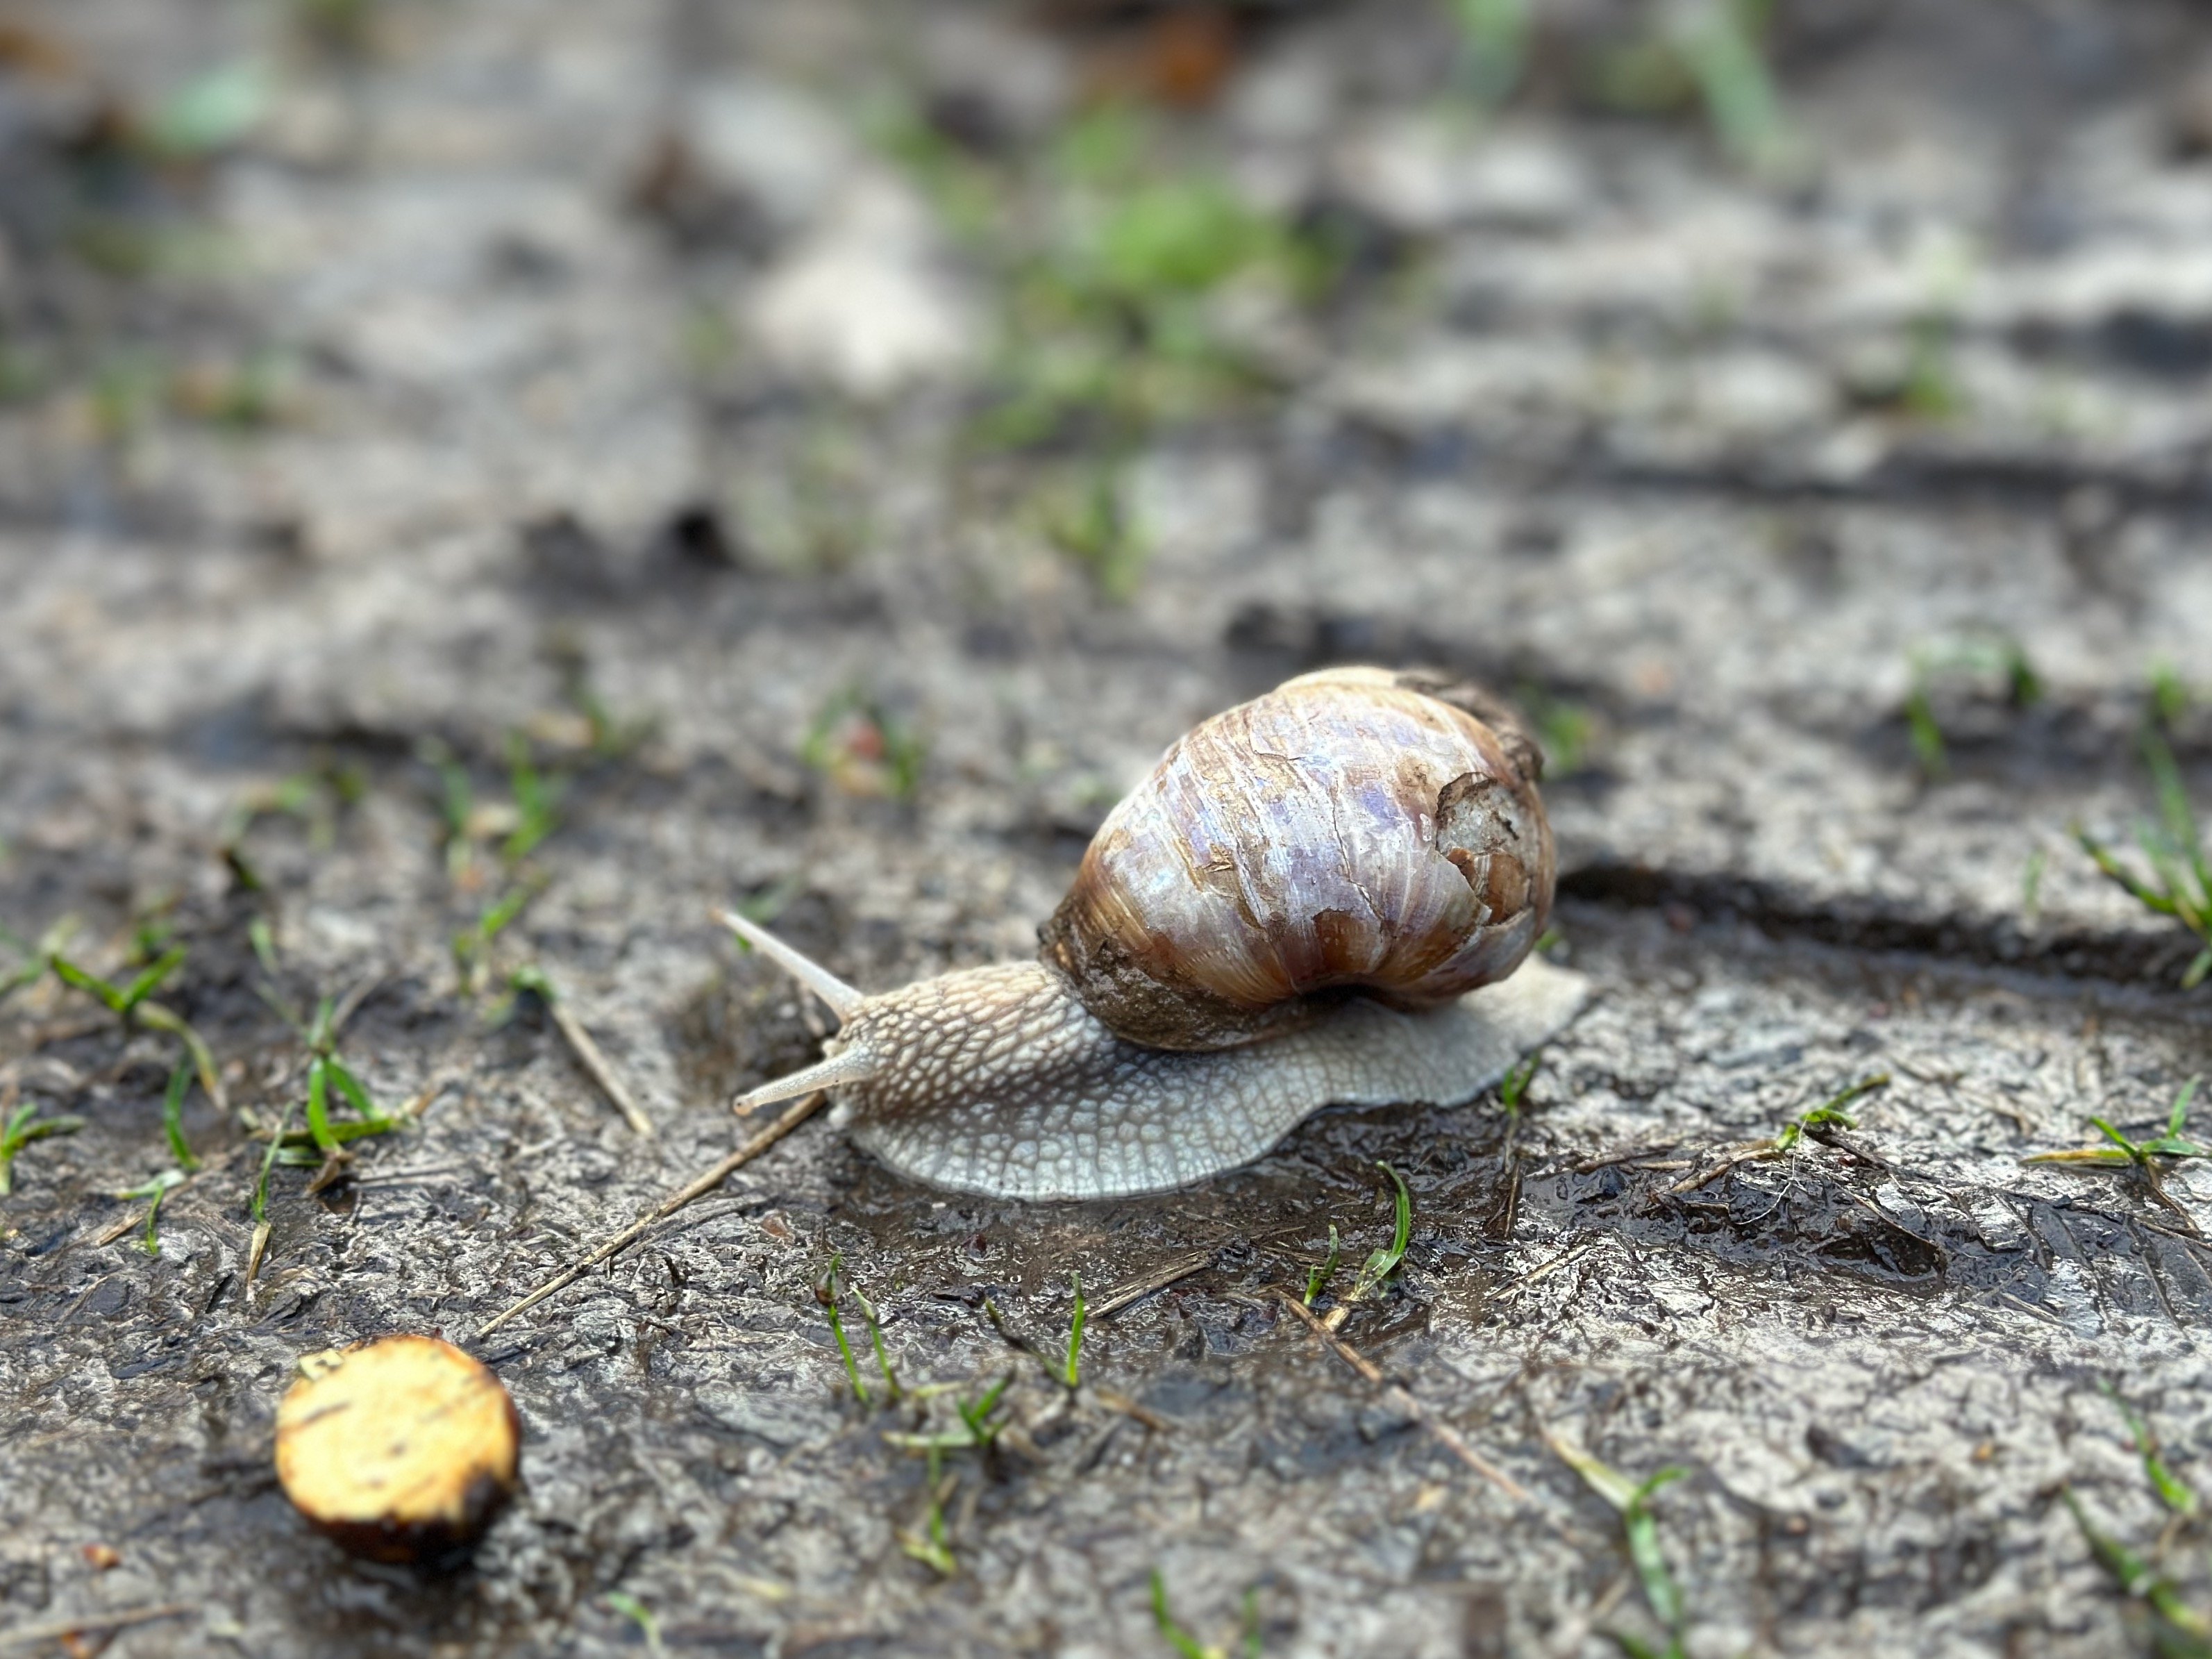 A case snail on a forest path.